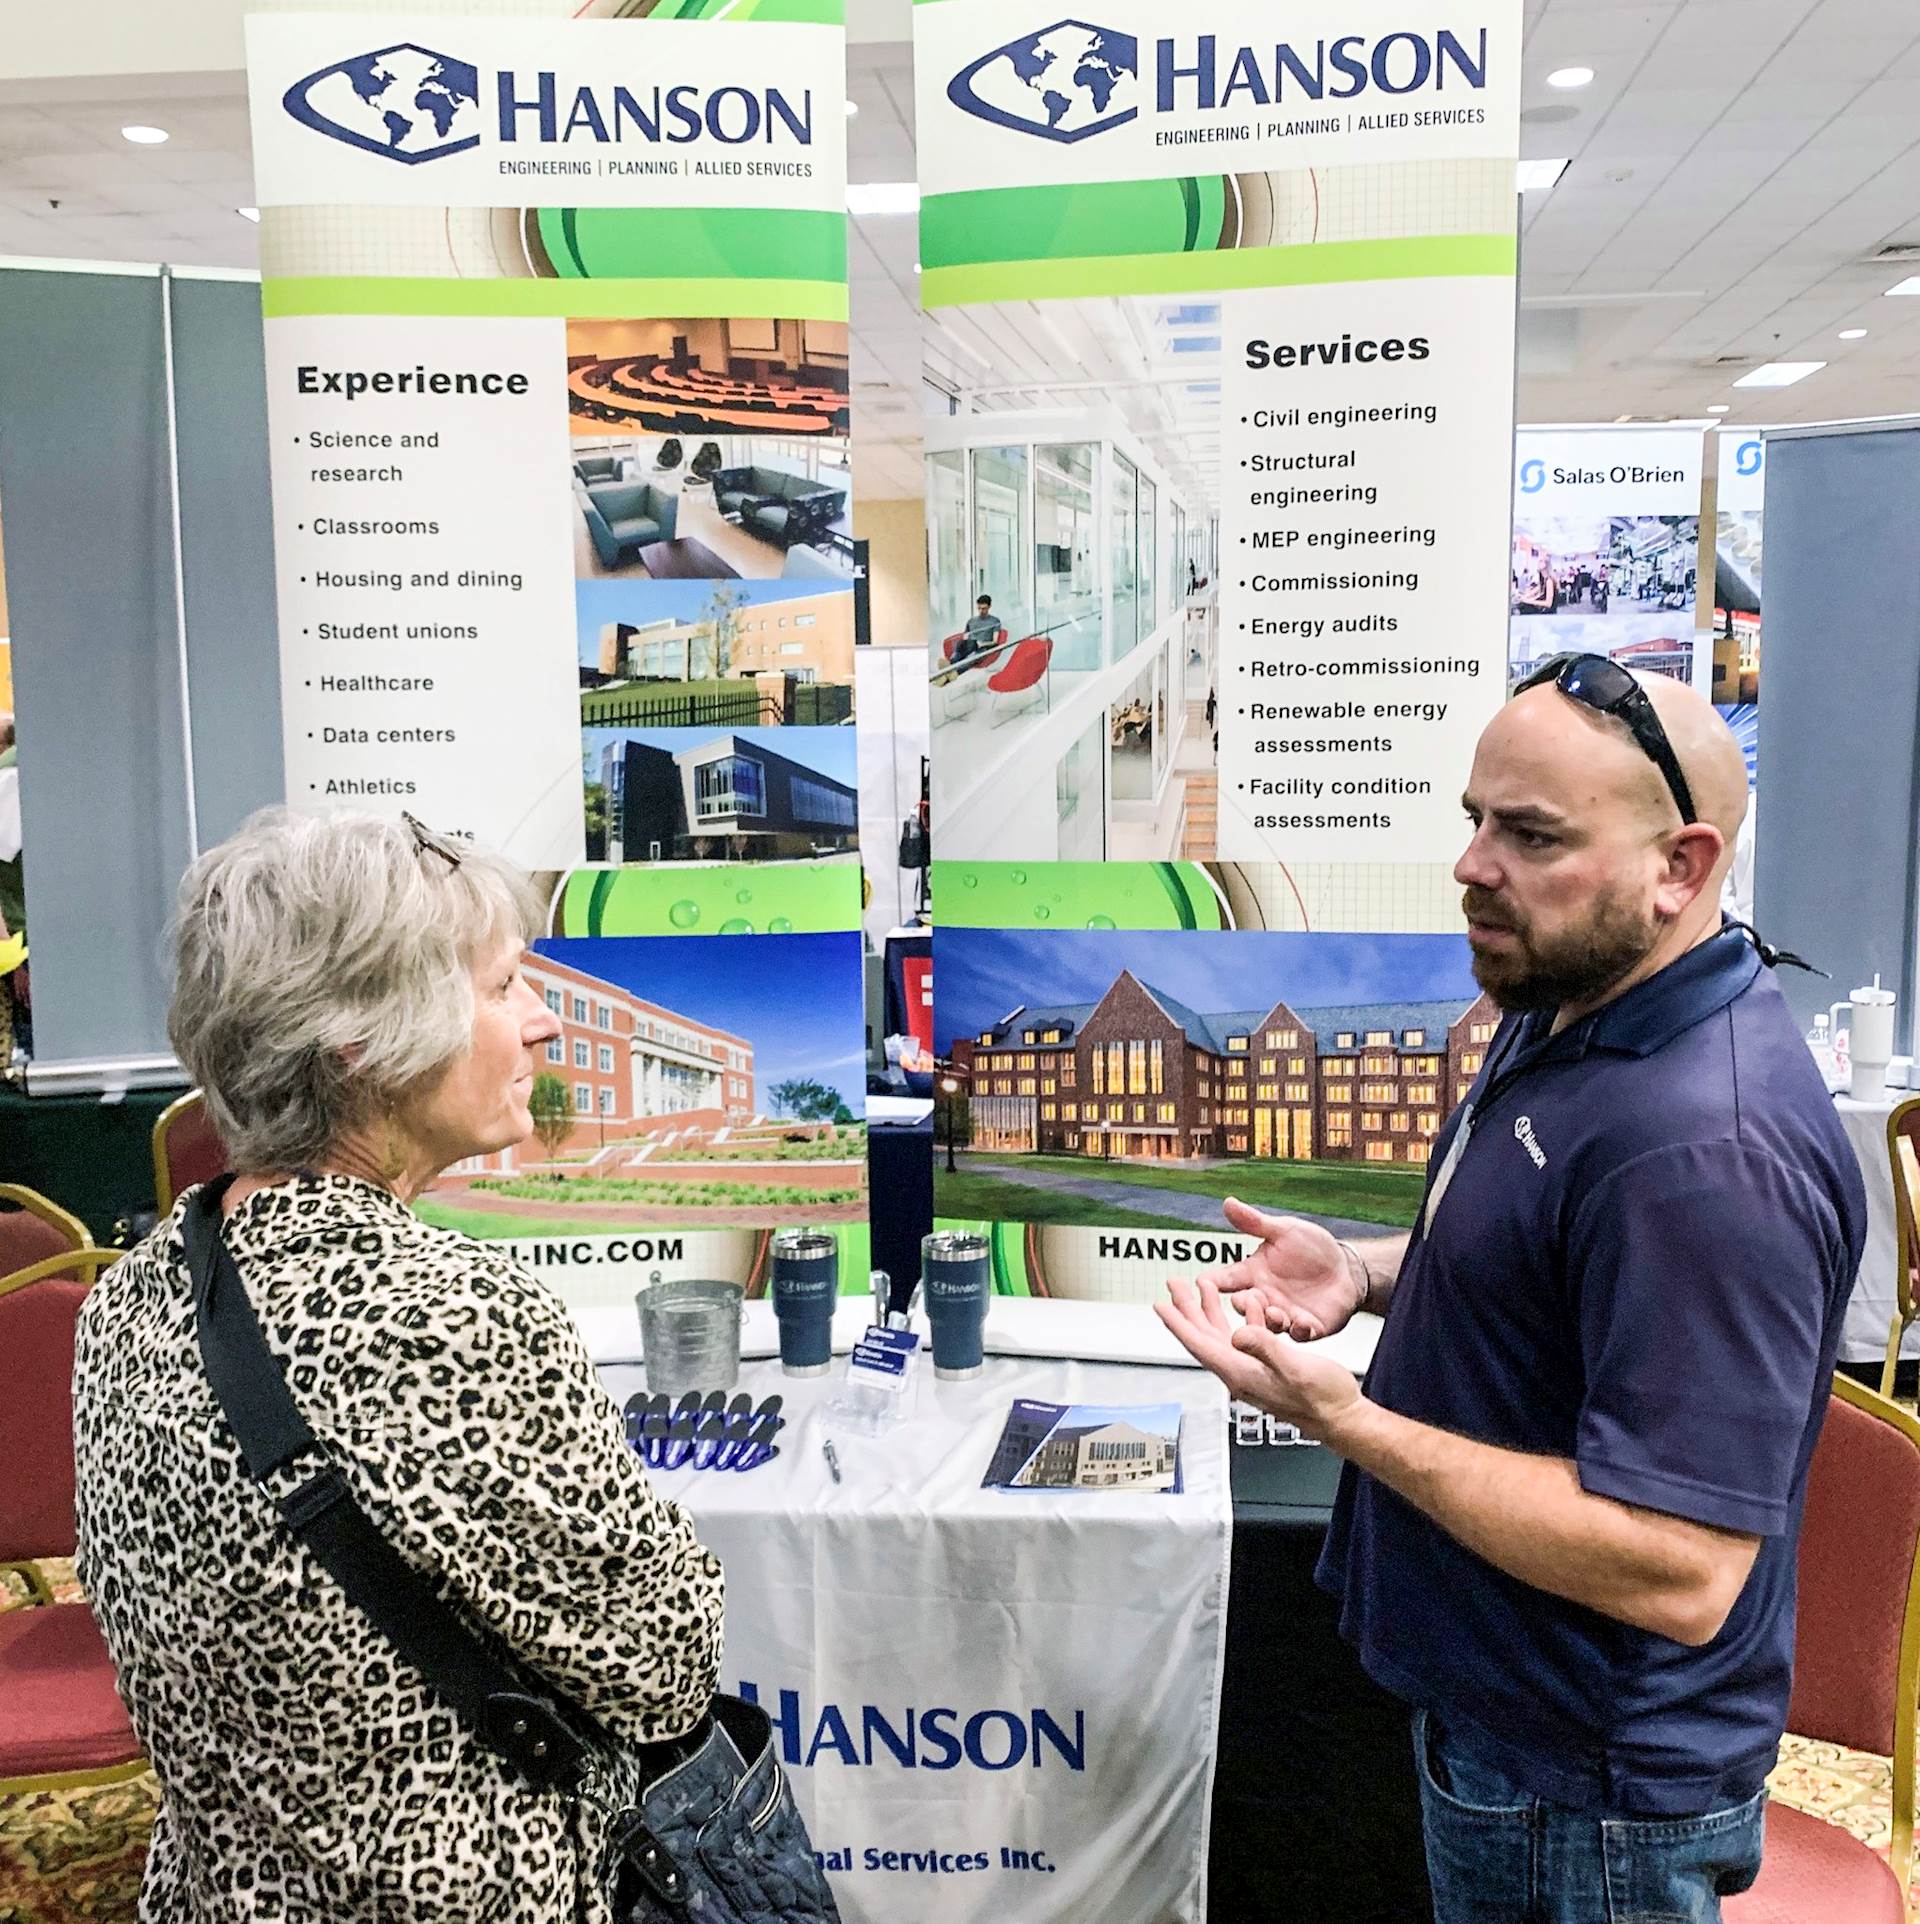 Two people stand in front of Hanson’s table and banners in a hotel event space; person on right is gesturing while talking to the other person